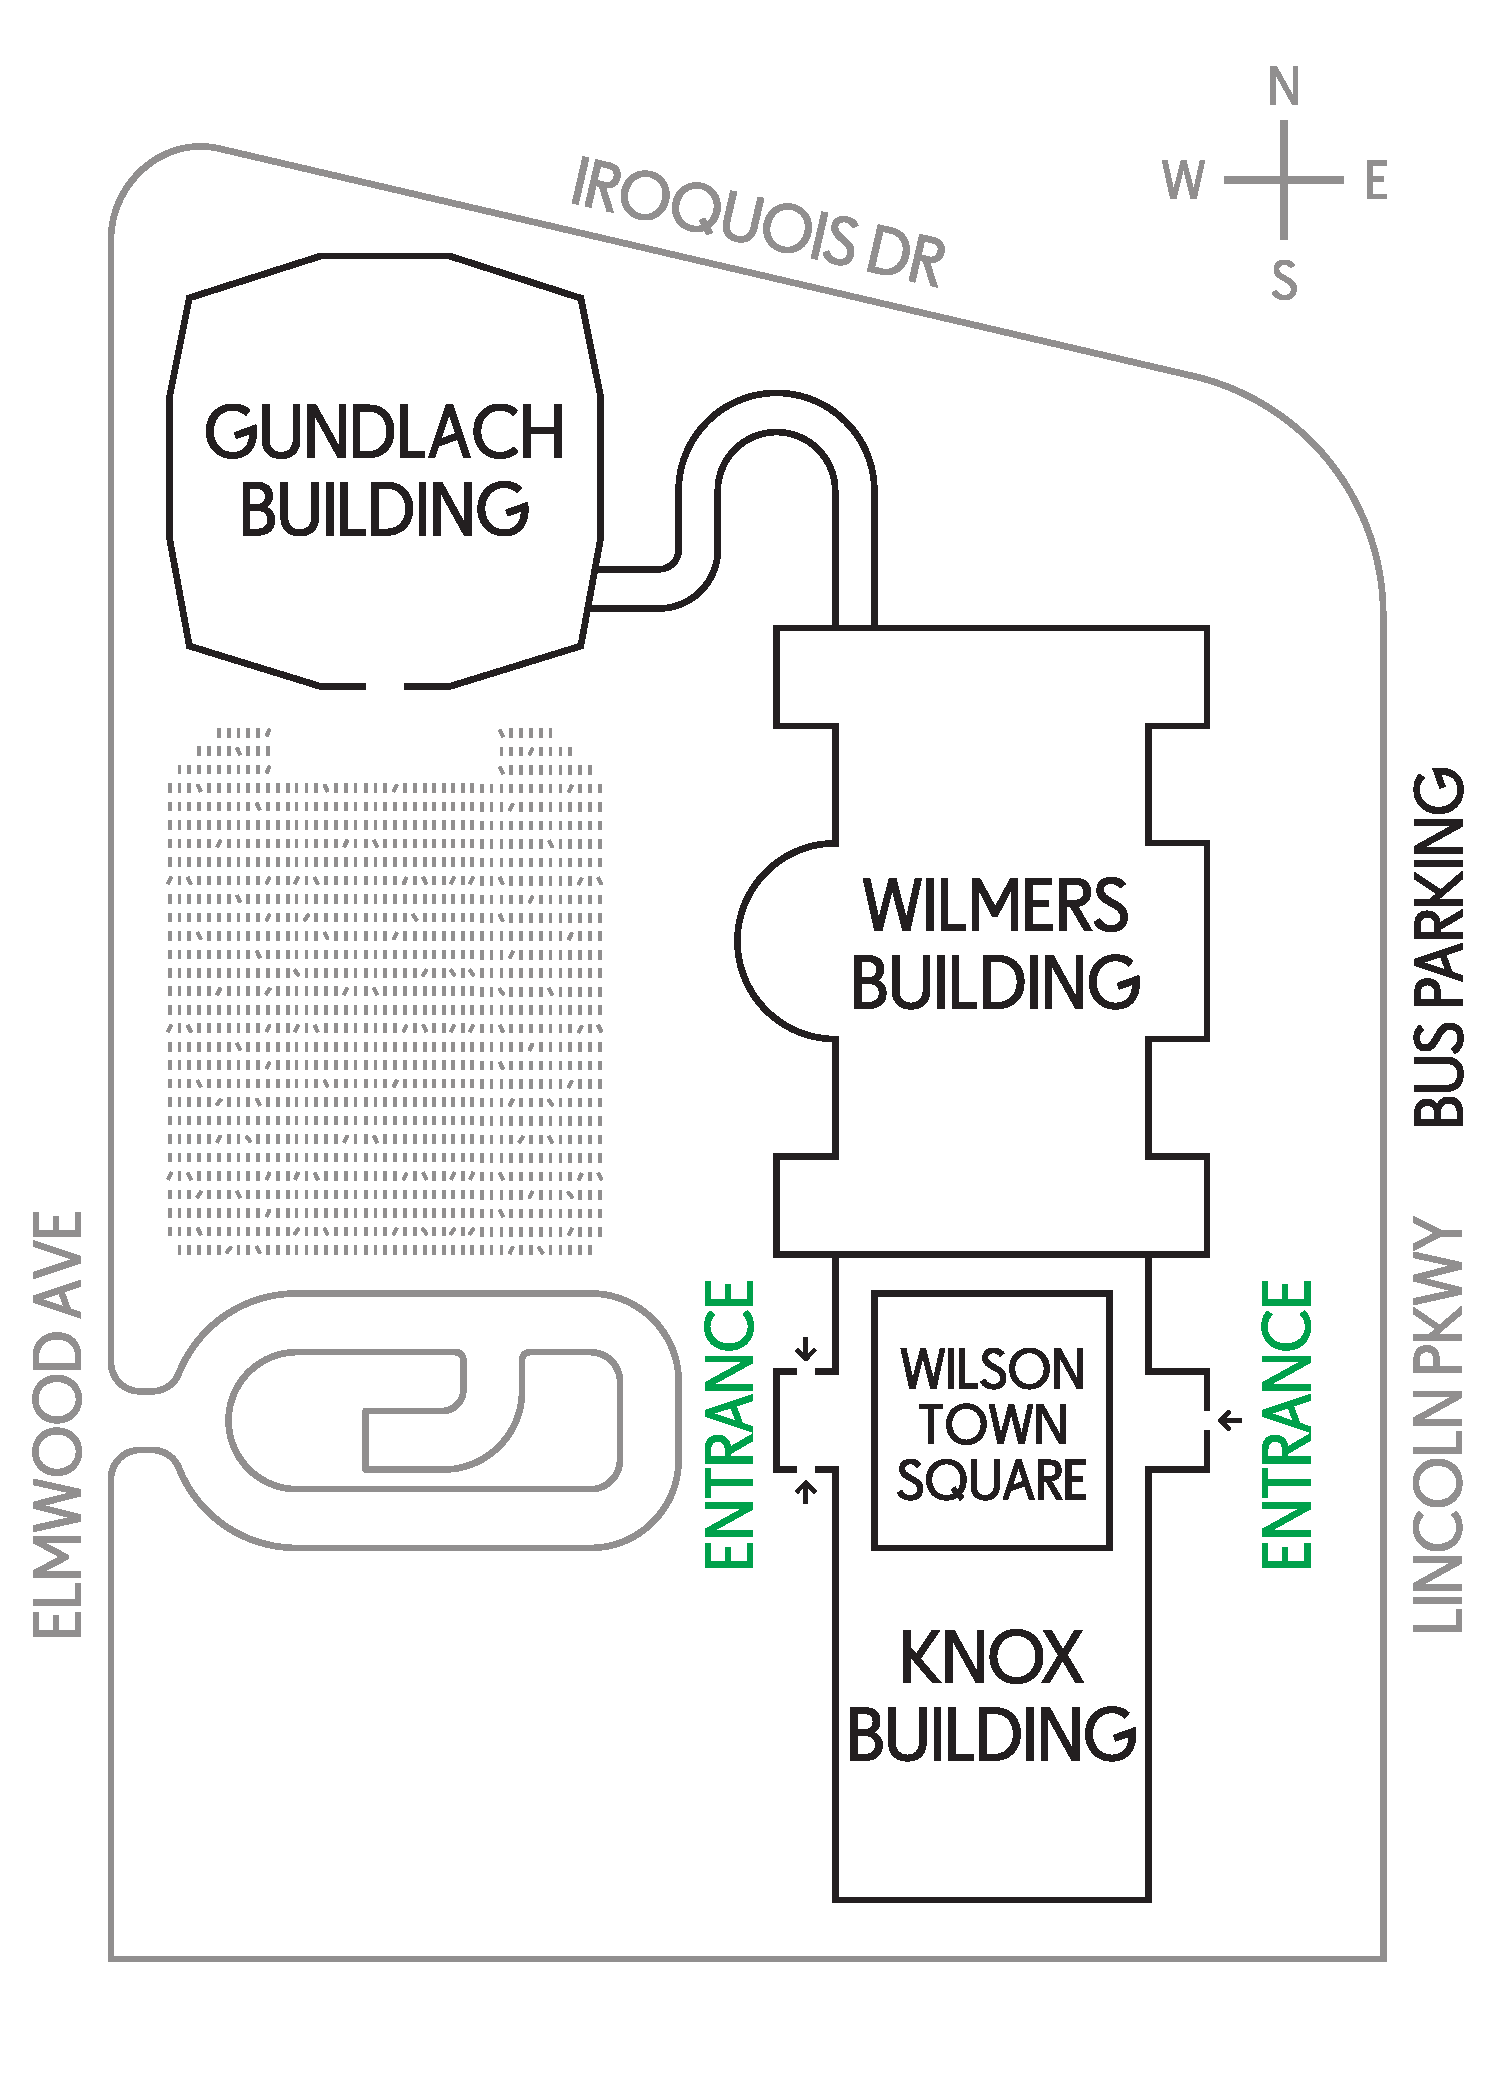 General outlined map of the Buffalo AKG Campus featuring the Gundlach building, Wilmers building, Wilson Town Square, and Knox building